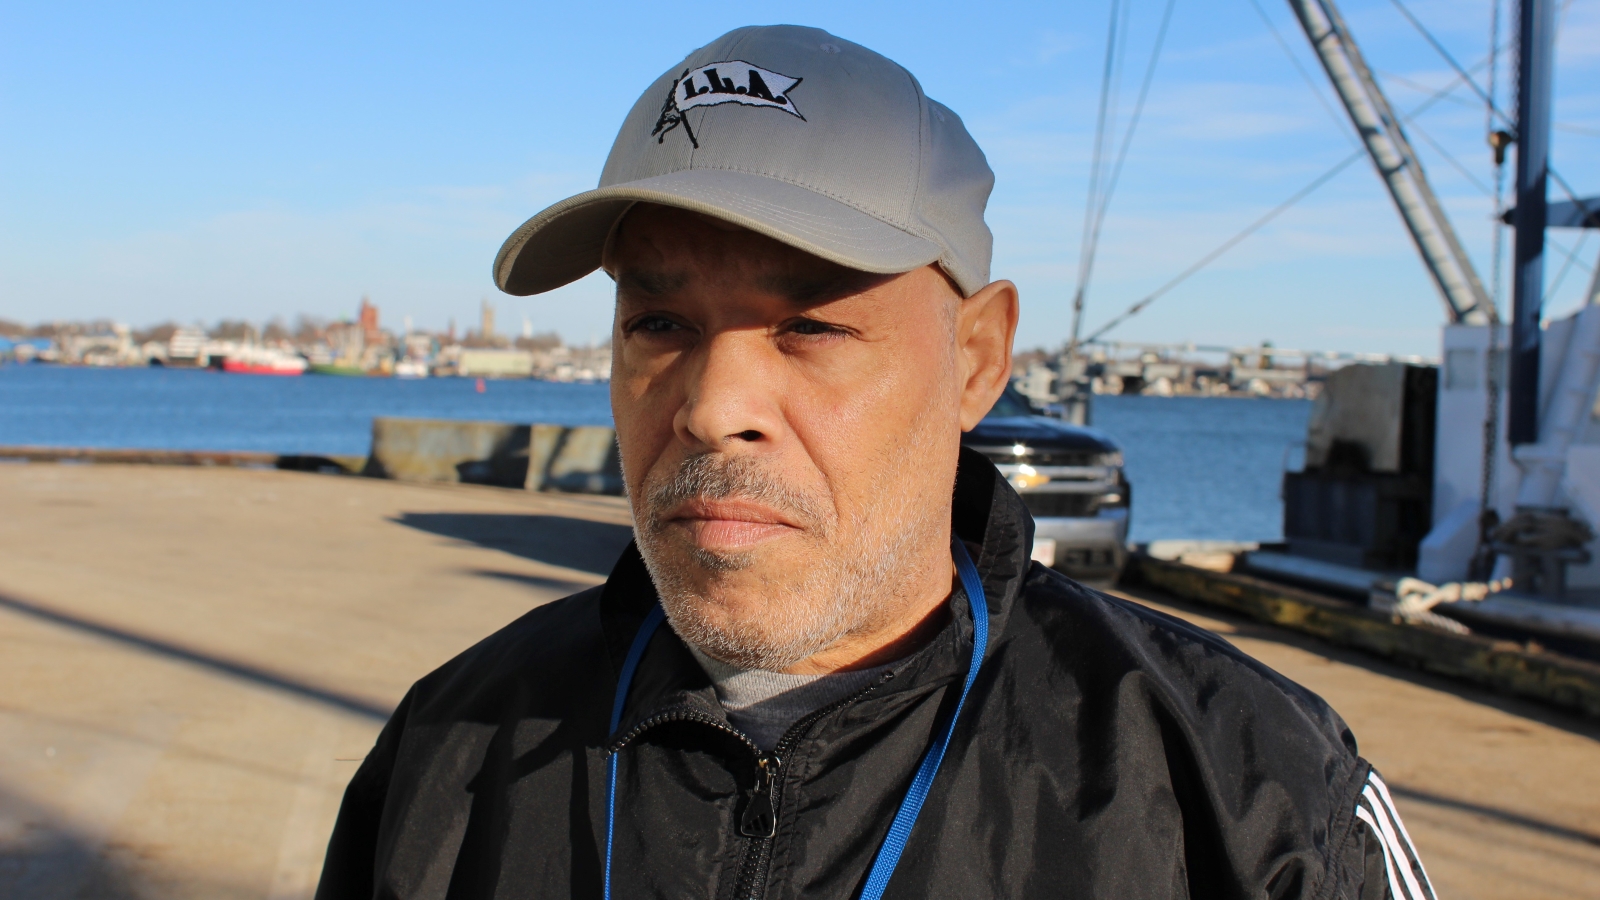 Kevin Rose, a third-generation New Bedford longshoreman, organized the protest on Friday.